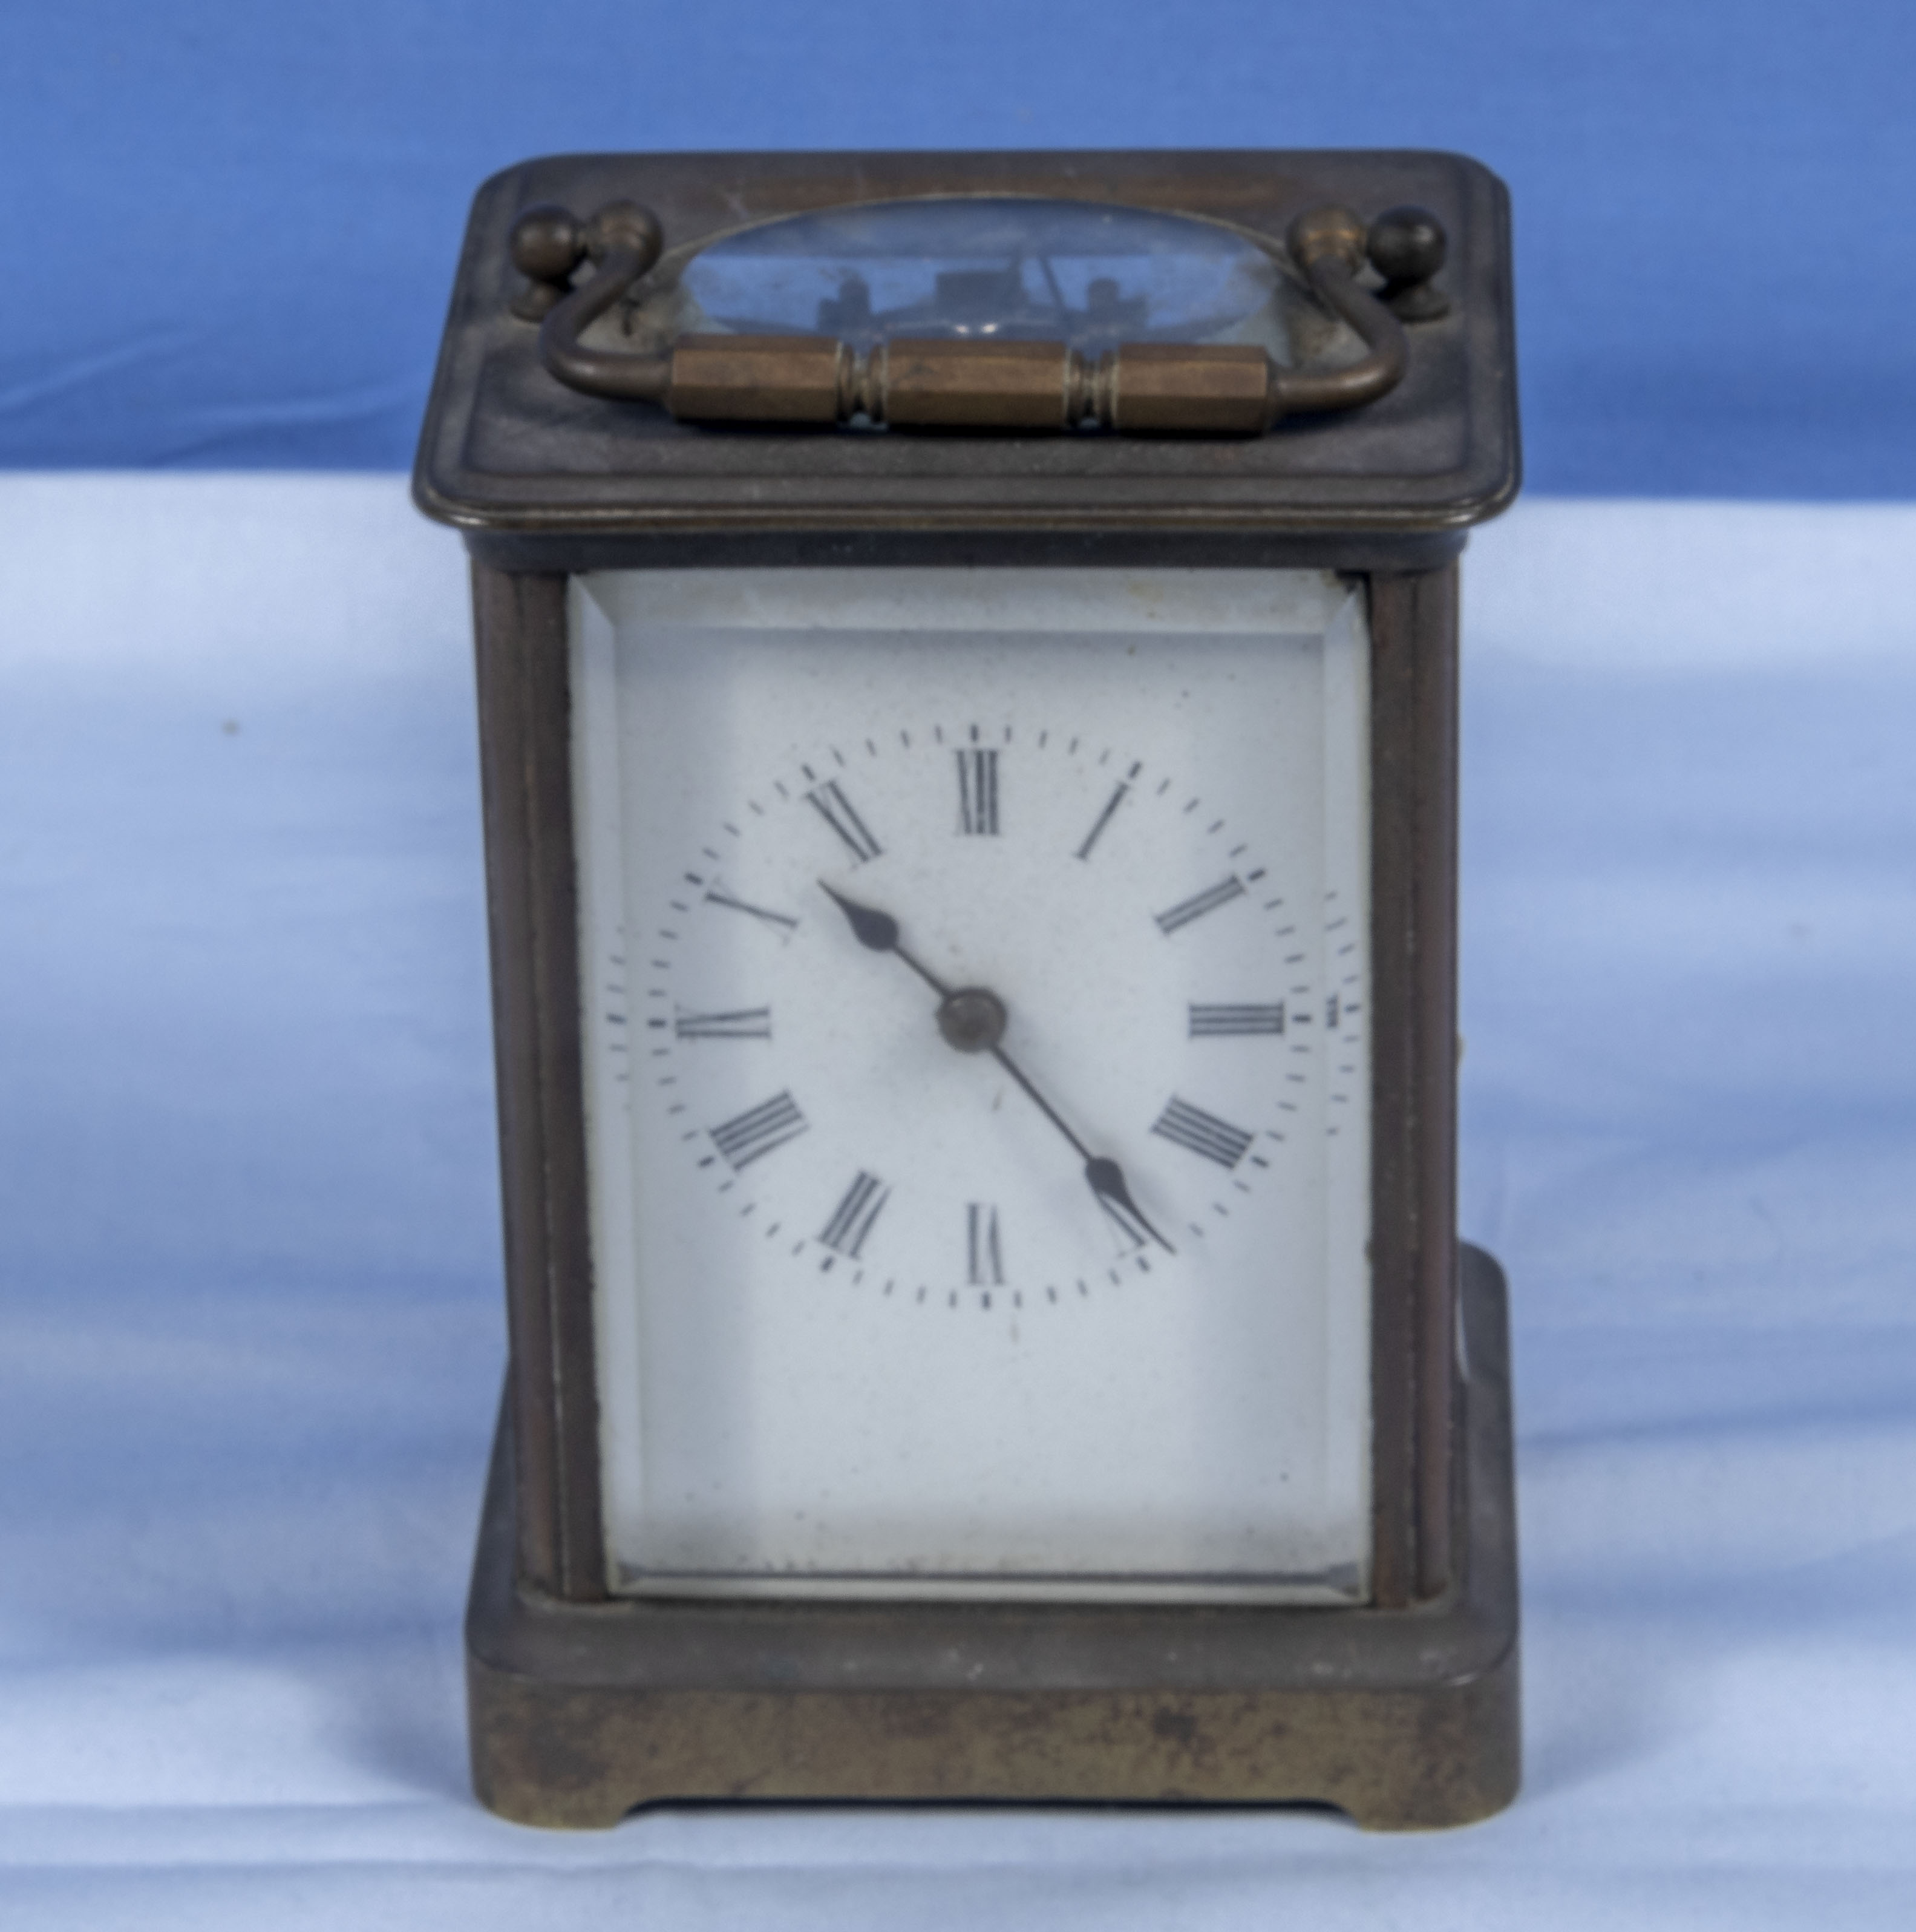 Antique French carriage clock 'Brevete GD' with alarm with white dial 5.25" tall